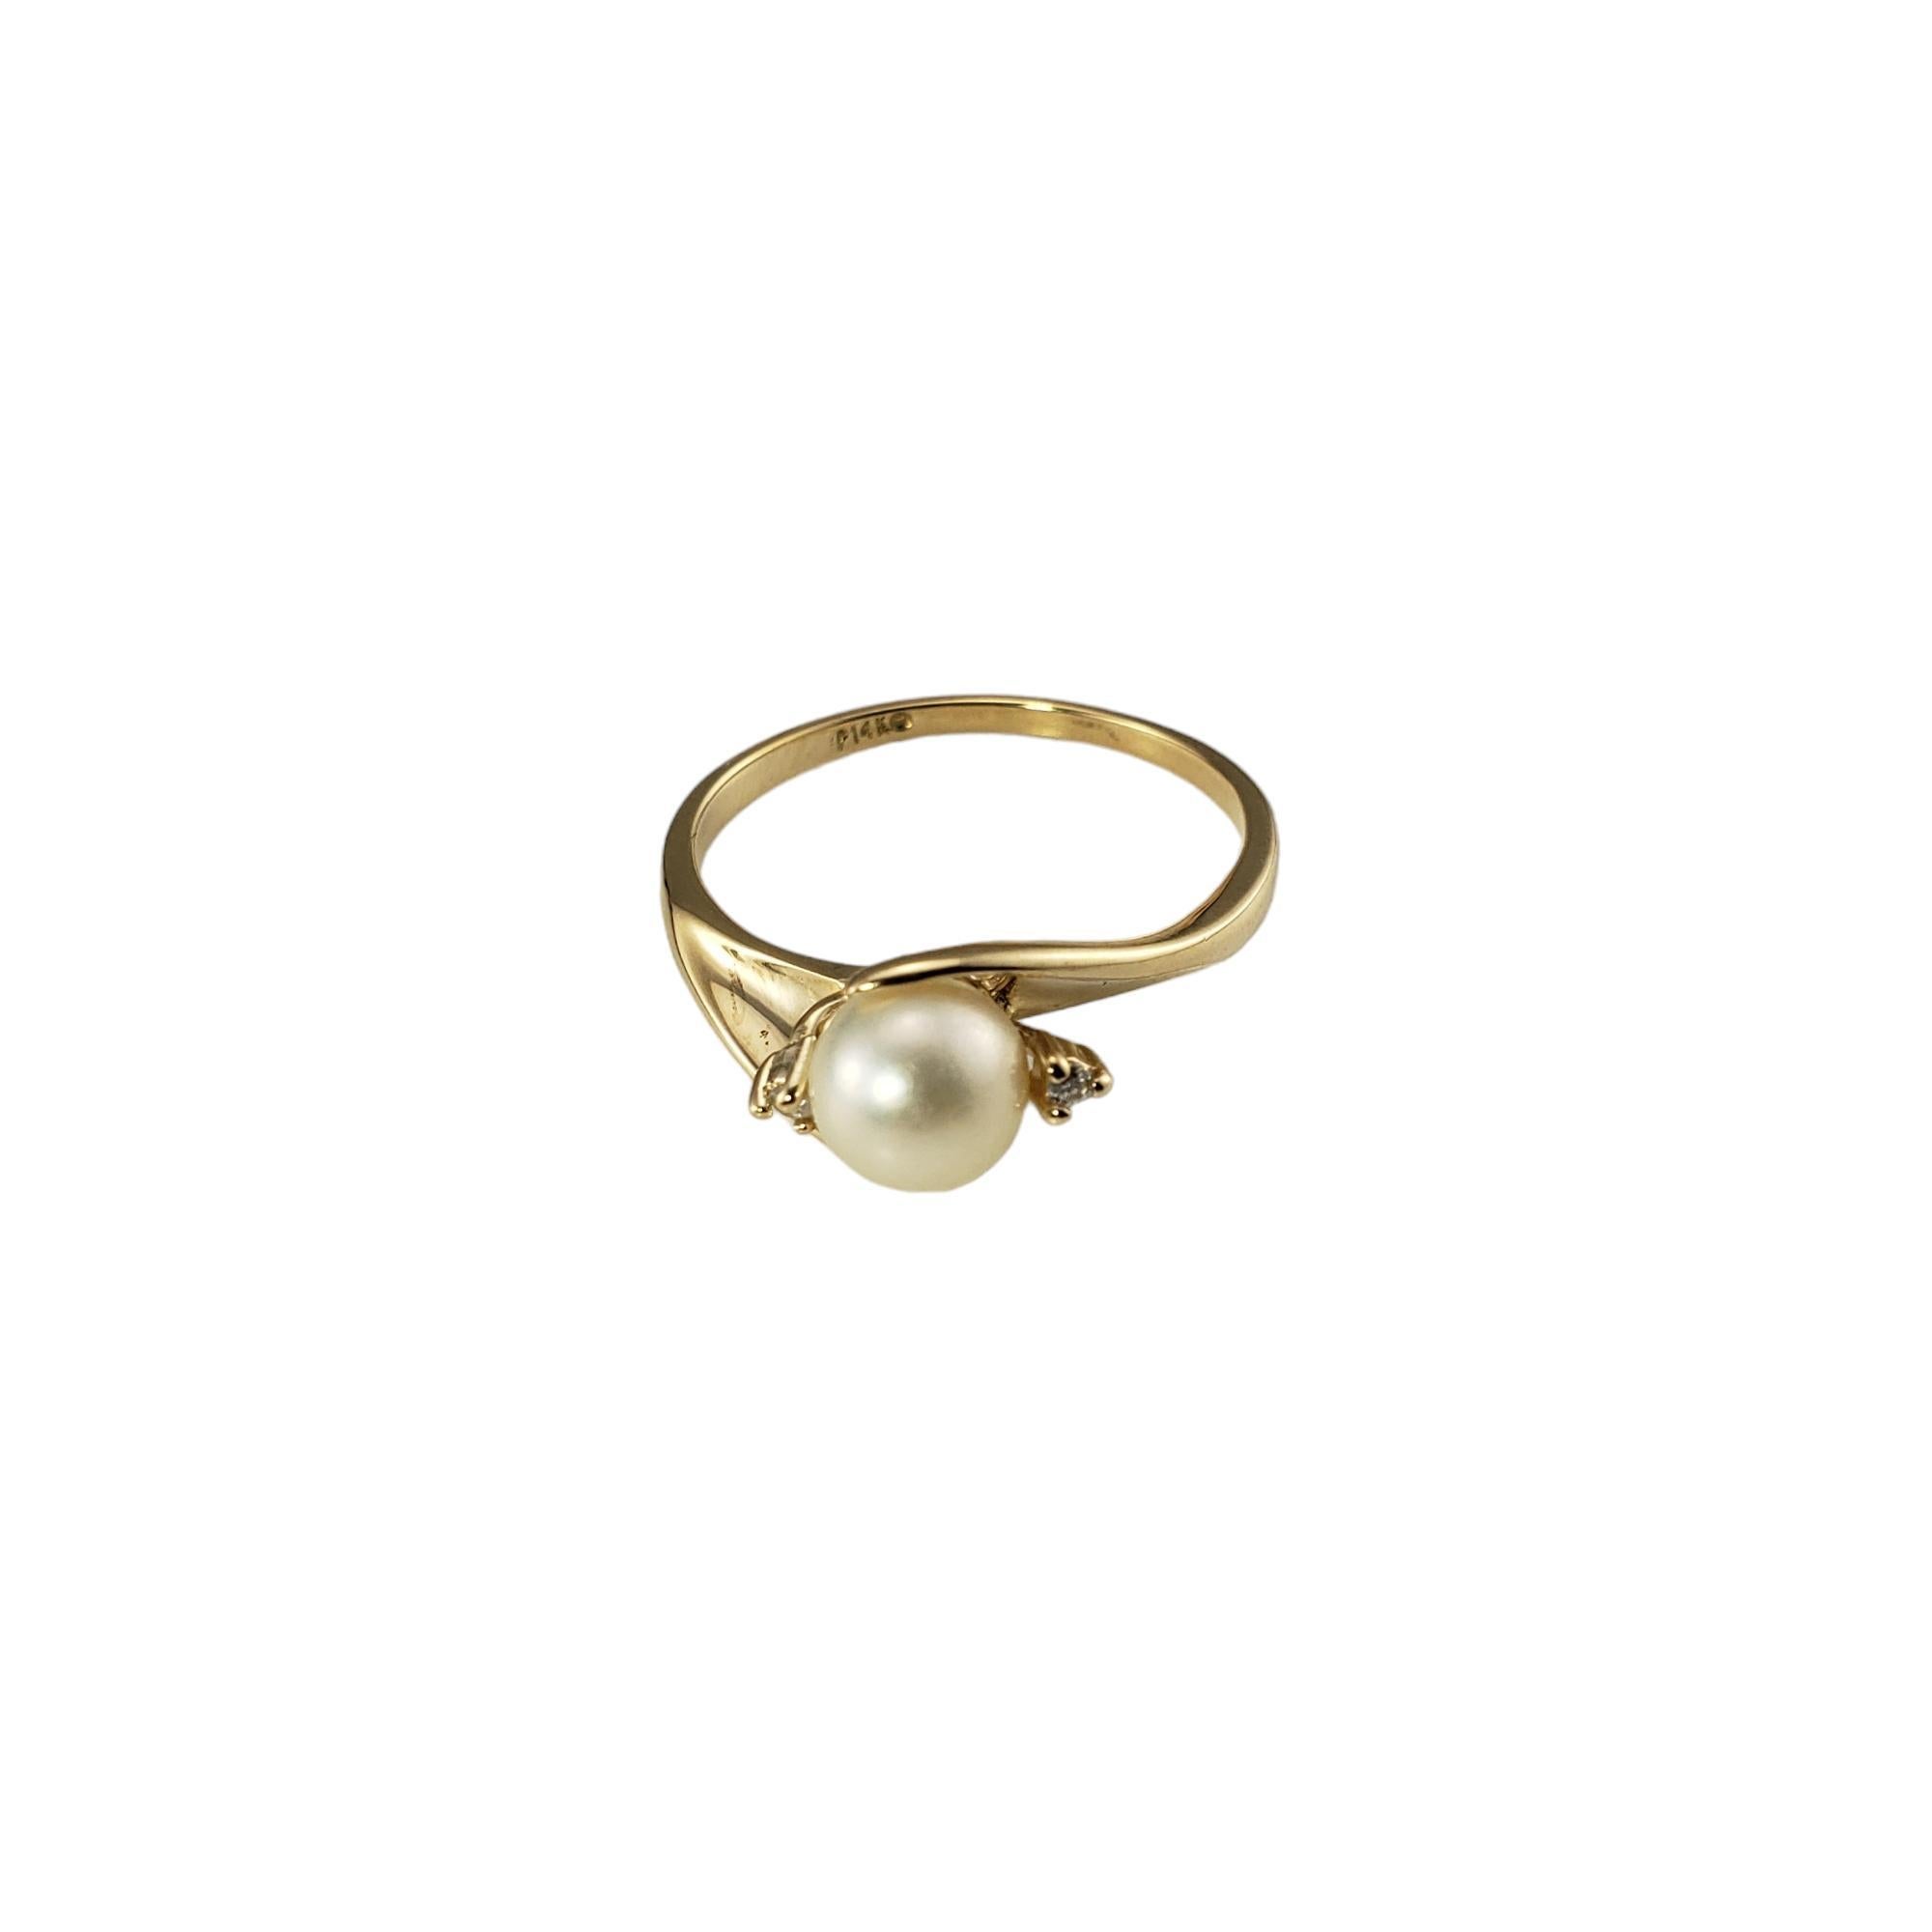 14 Karat Yellow Gold Pearl and Diamond Ring Size 9

This lovely ring features one round pearl (7 mm) and two round brilliant cut diamonds set in classic 14K yellow gold.  

Approximate total diamond weight: 0.02 ct.

Diamond color: H

Diamond